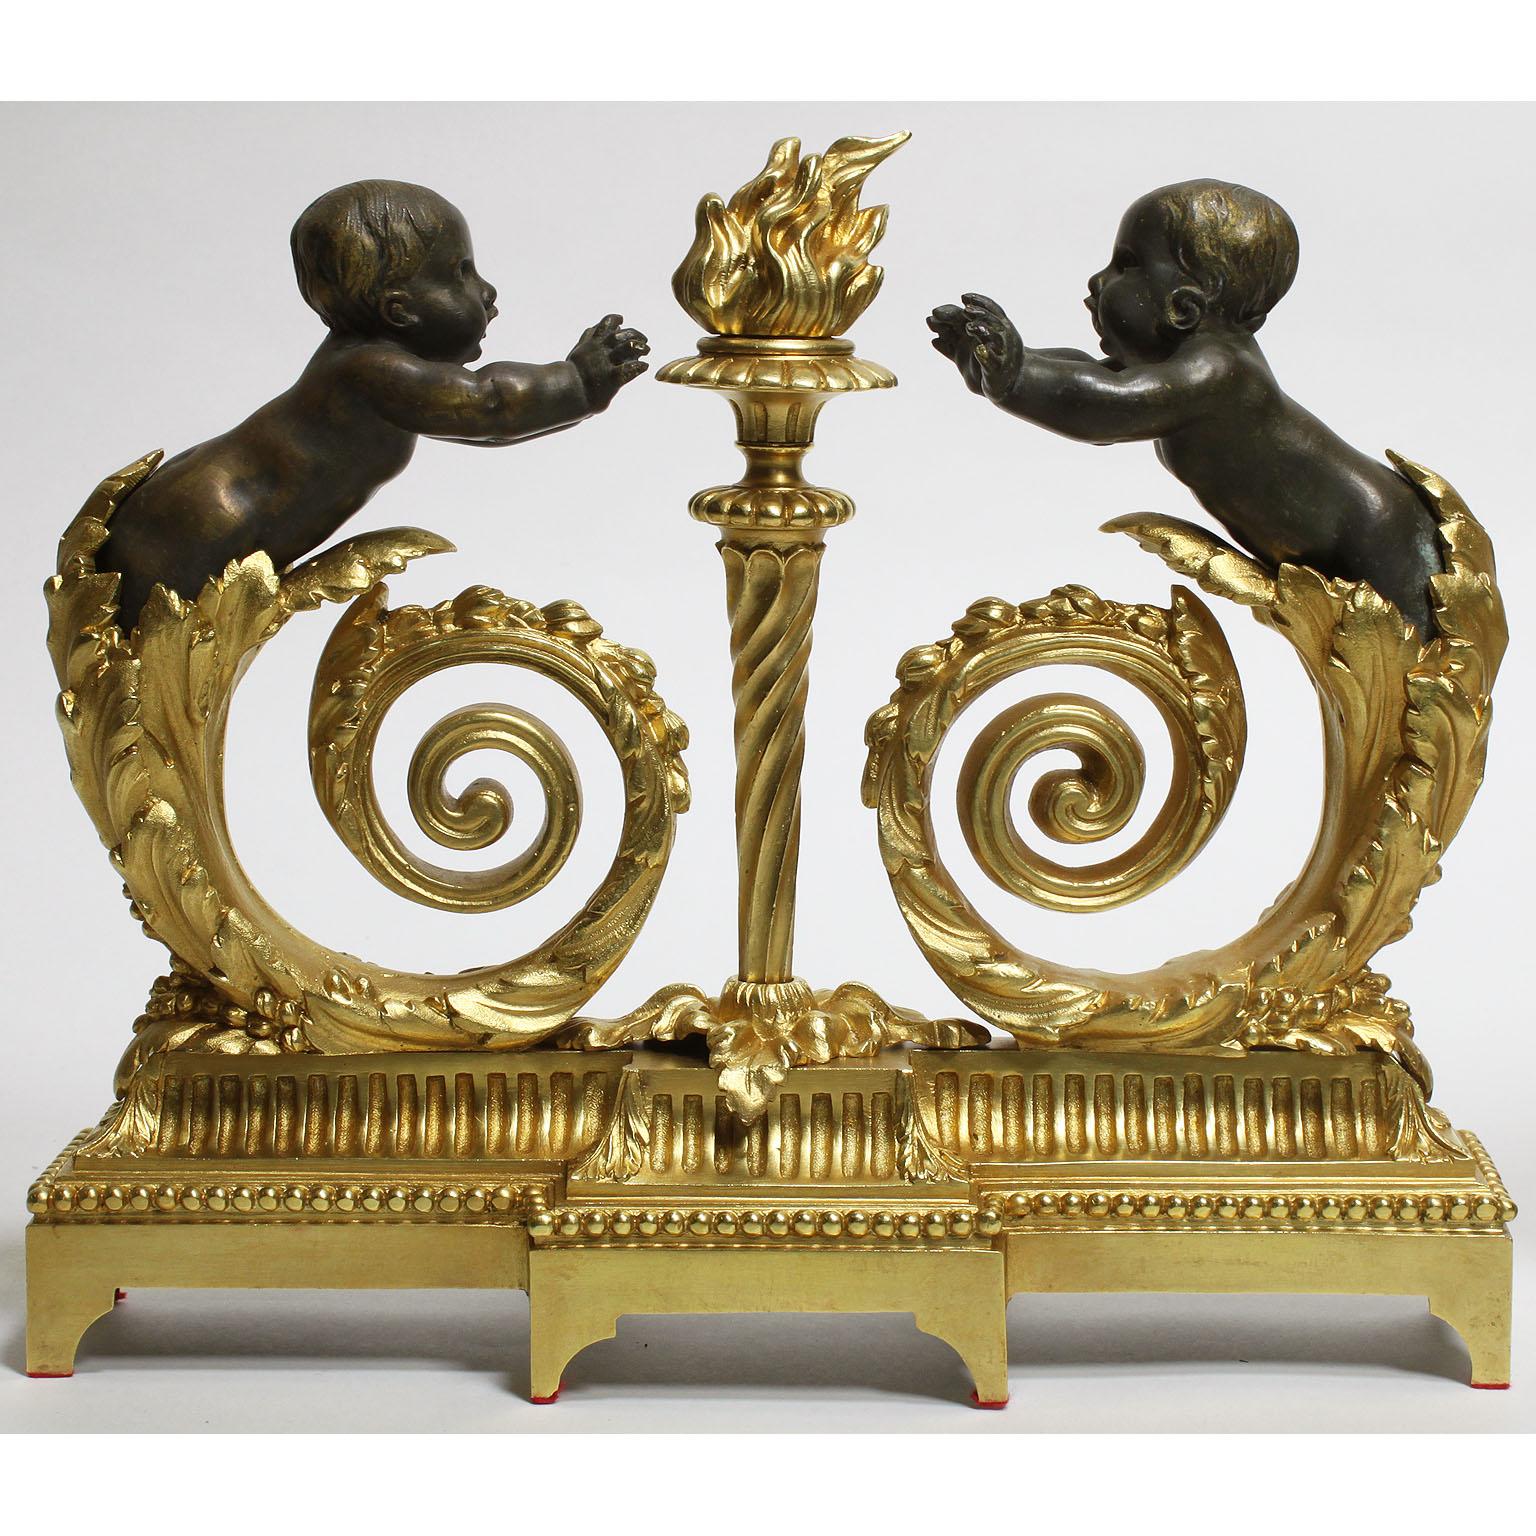 A fine pair of French 19th-20th century Louis XV style gilt and patinated bronze figural chenets. Each cast as two patinated figures of amorini (Putti) growing out of leafy volute vine stems warming their hands on the centre flambeau, raised on a